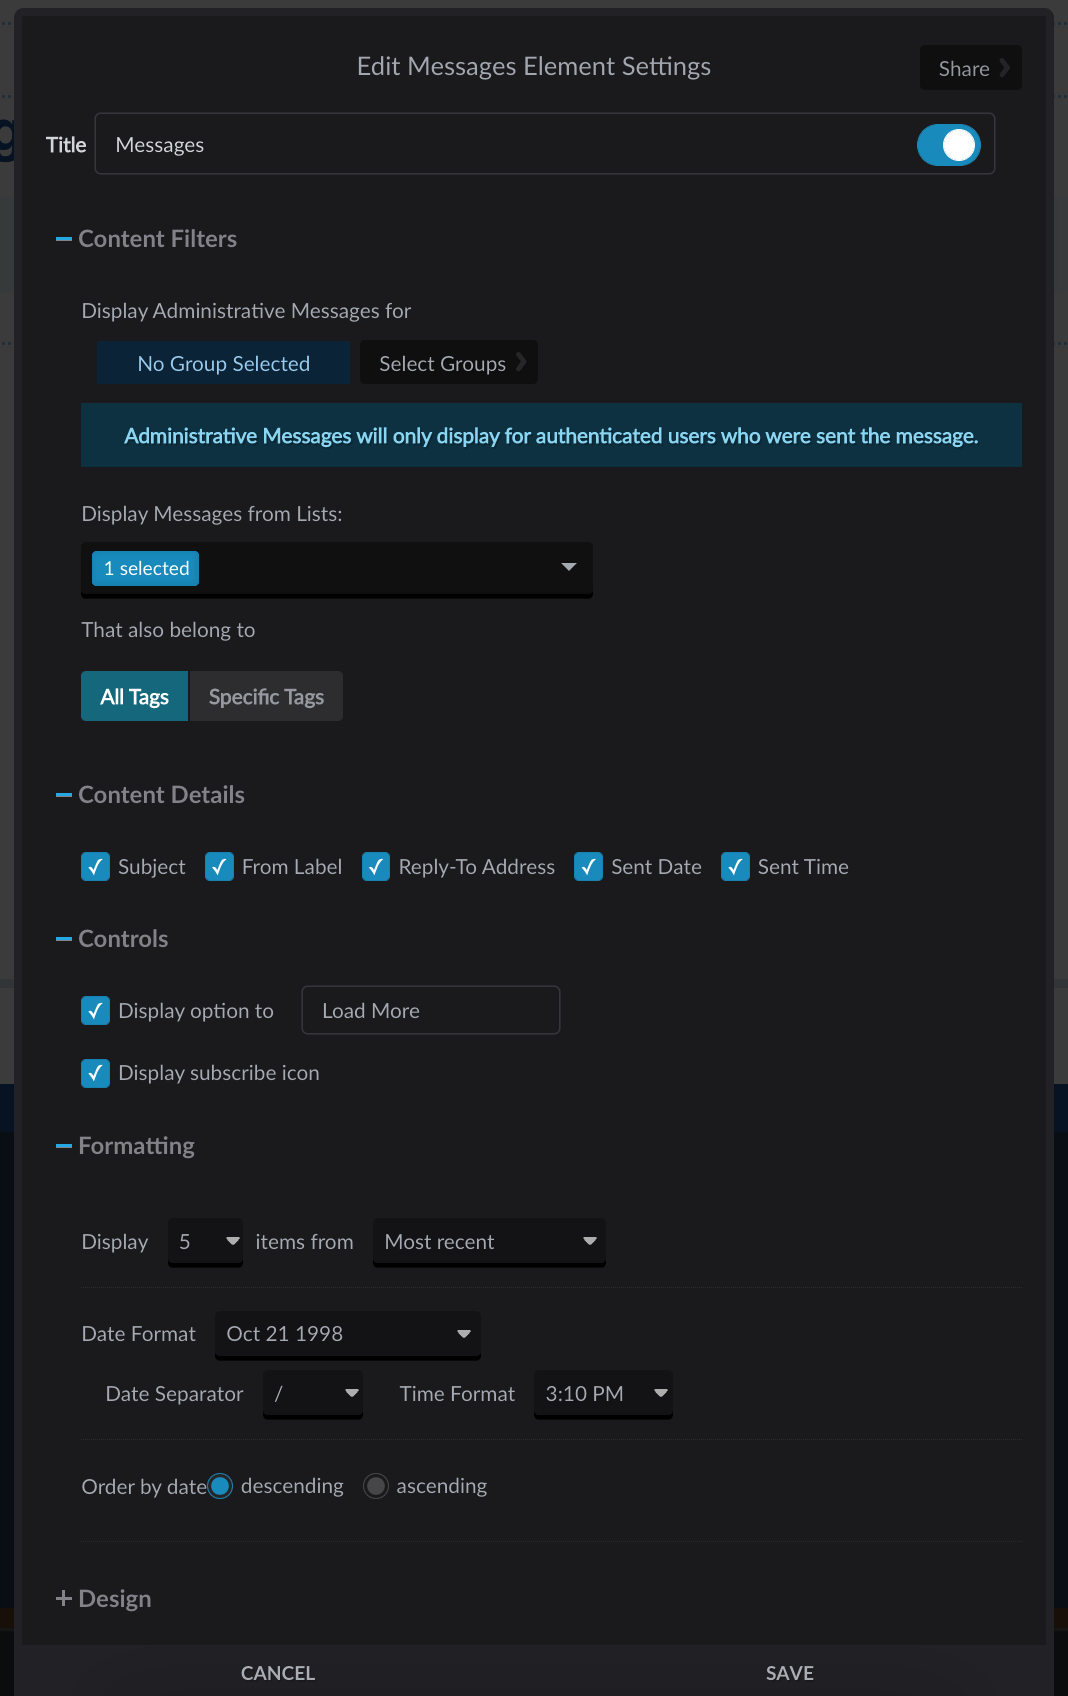 Messages element settings screen with all options expanded